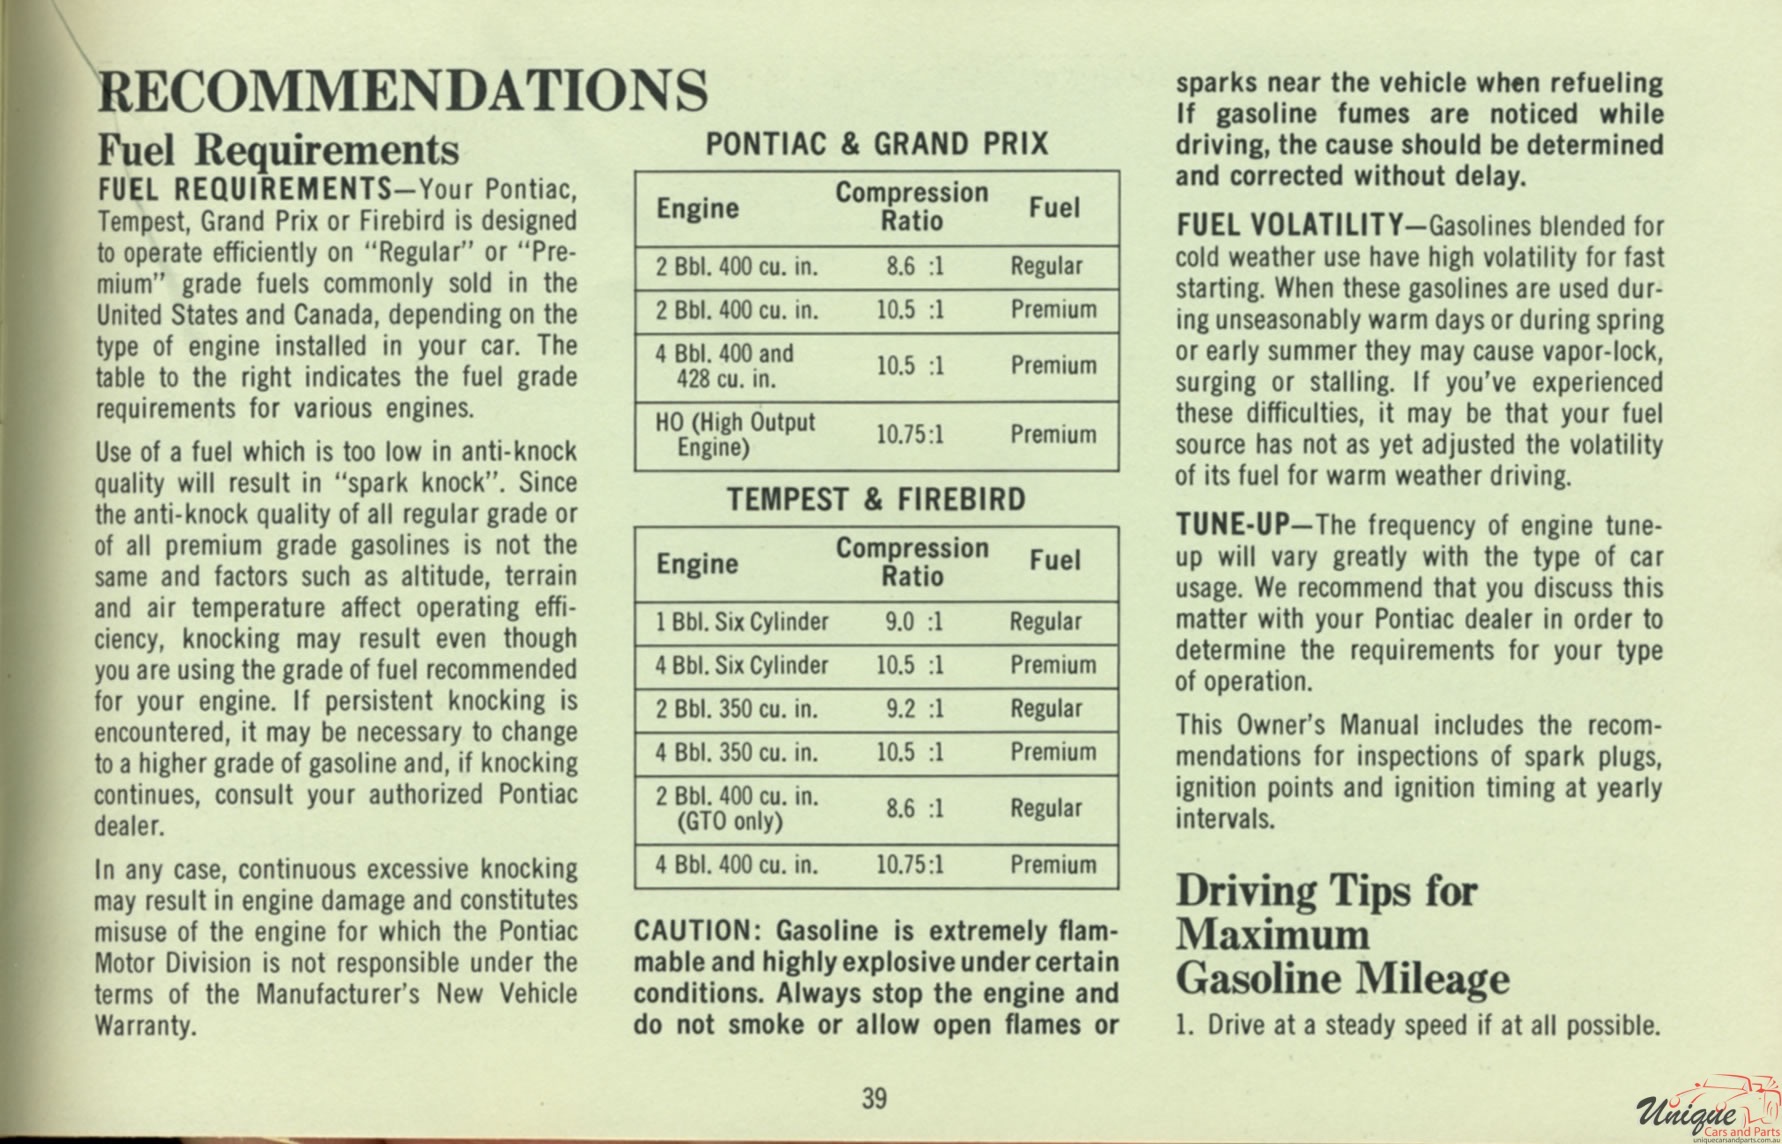 1969 Pontiac Owners Manual Page 18